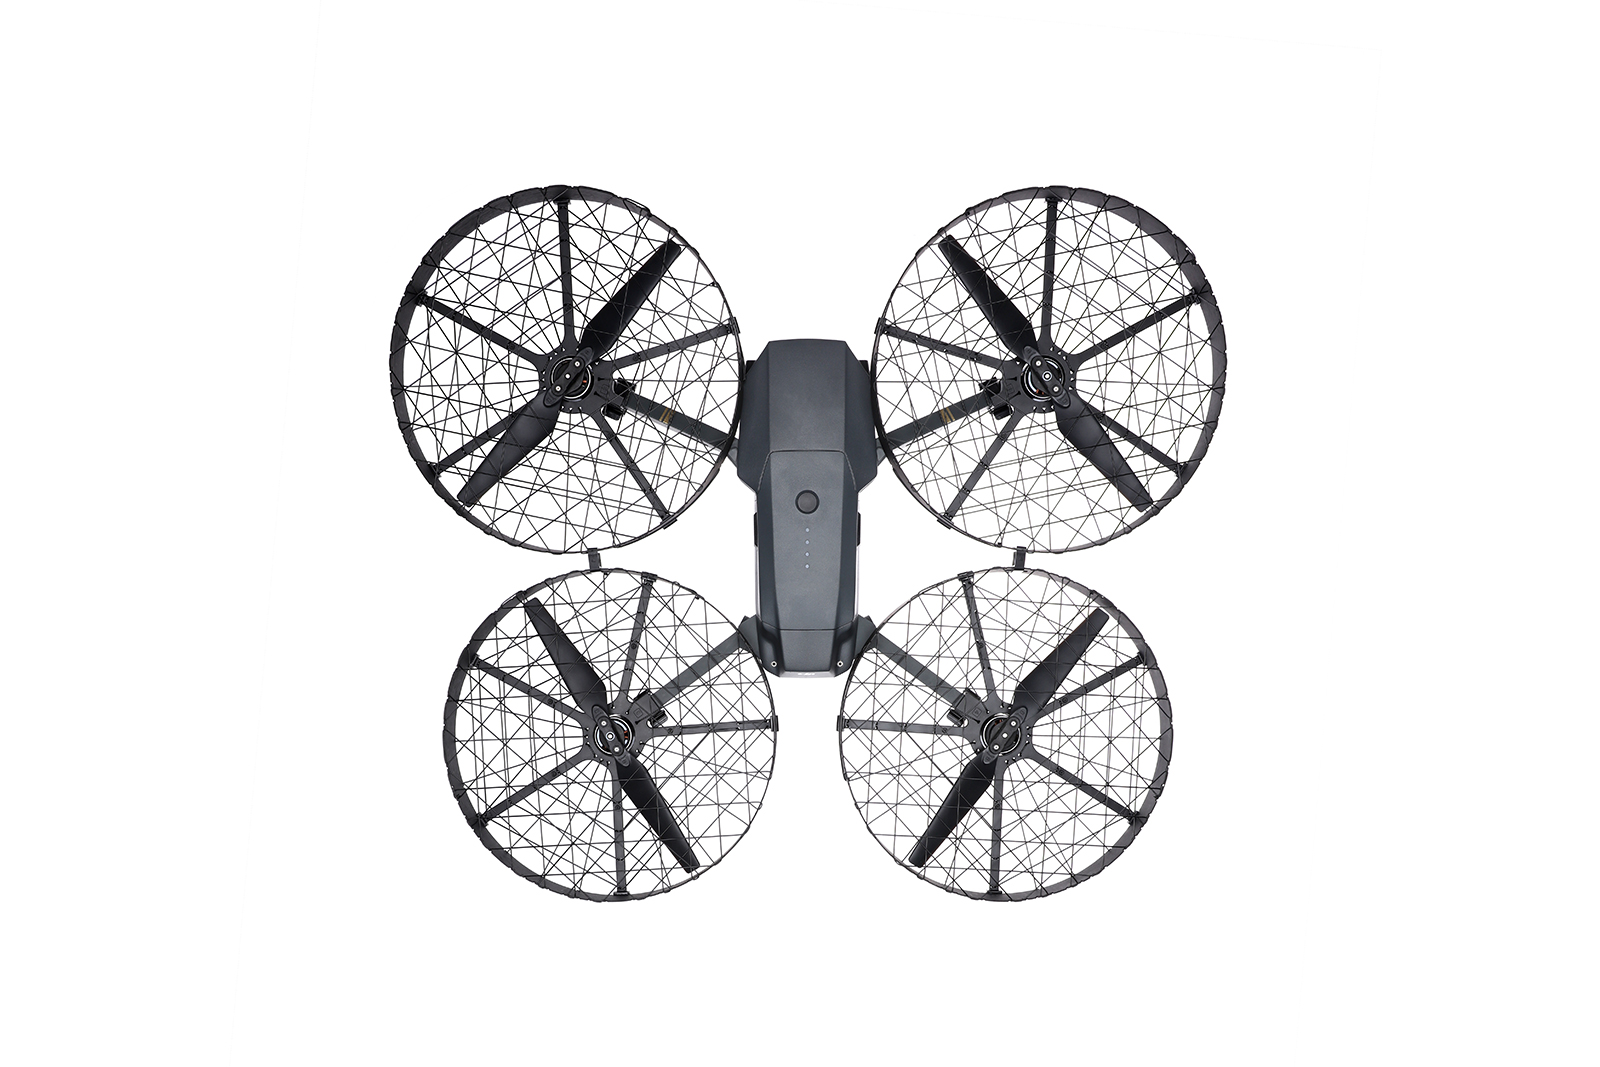 dji launches mavic pro accessories with propeller cage